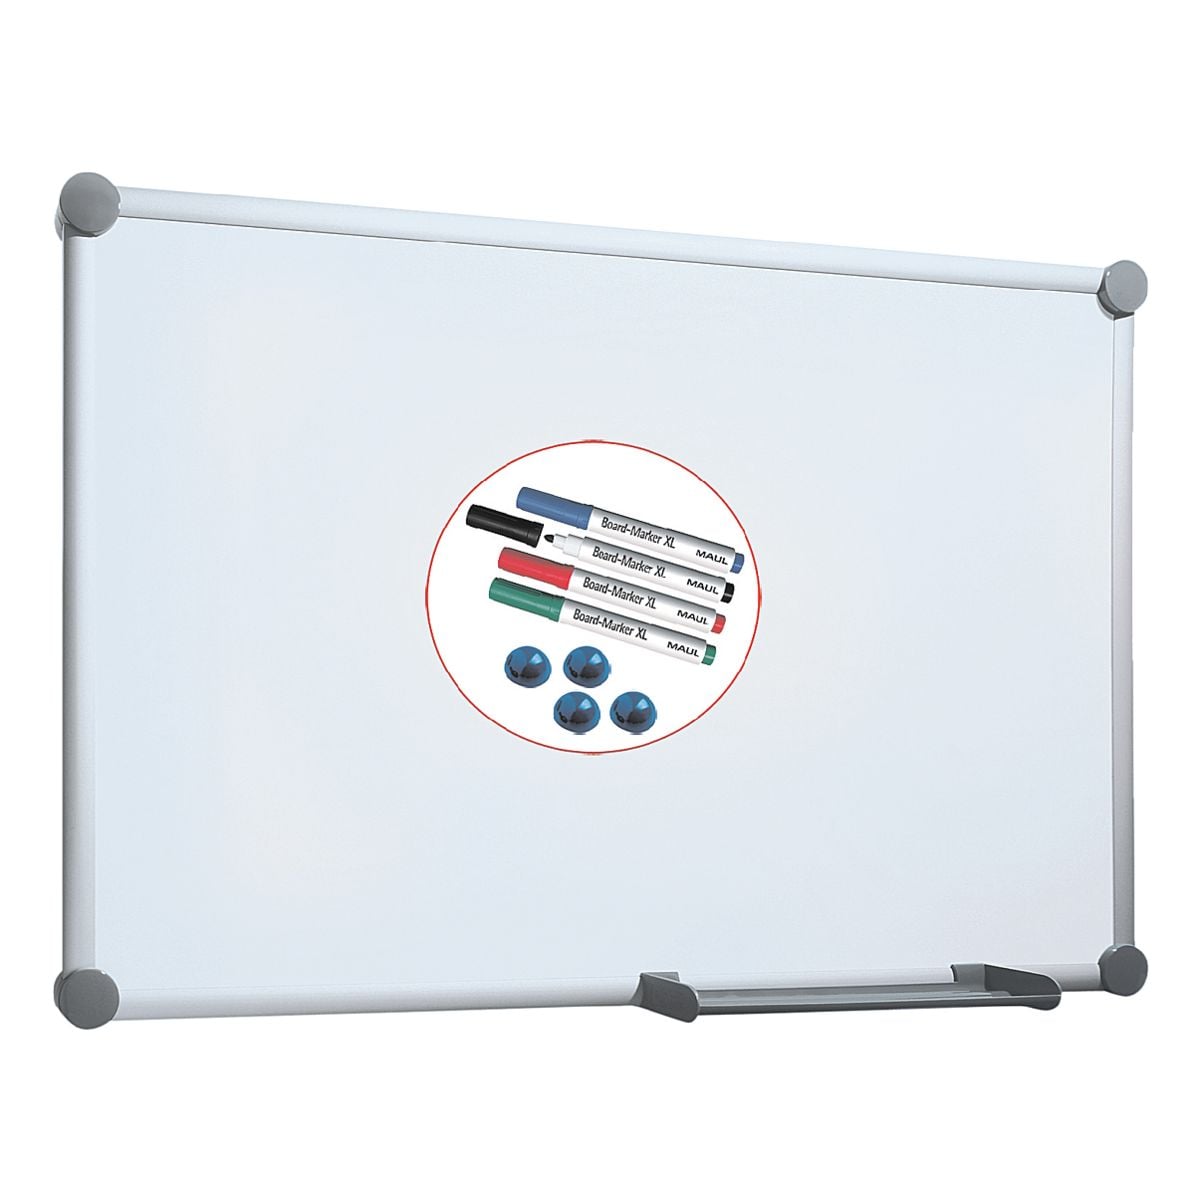 Maul Whiteboard 2000 Maulpro 6305684 emailliert, 300x120 cm